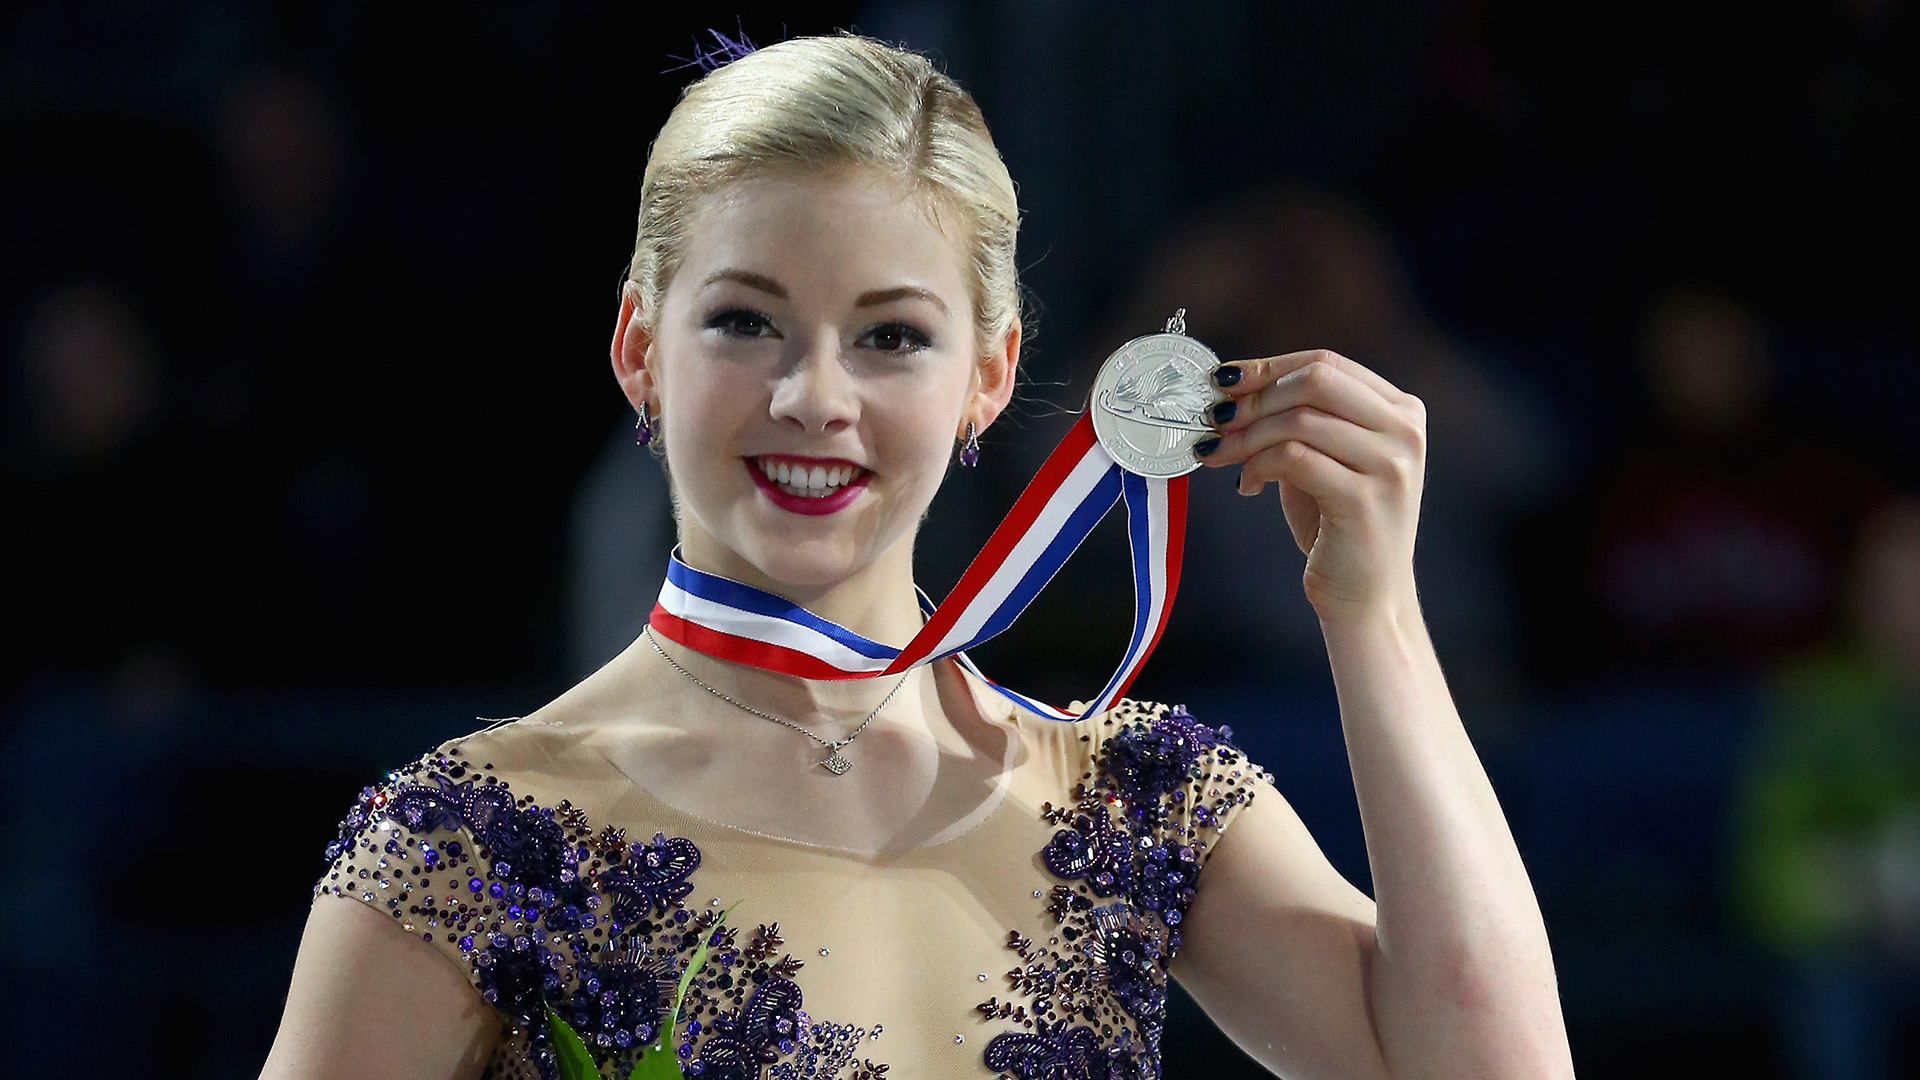 Gracie Gold Wallpapers